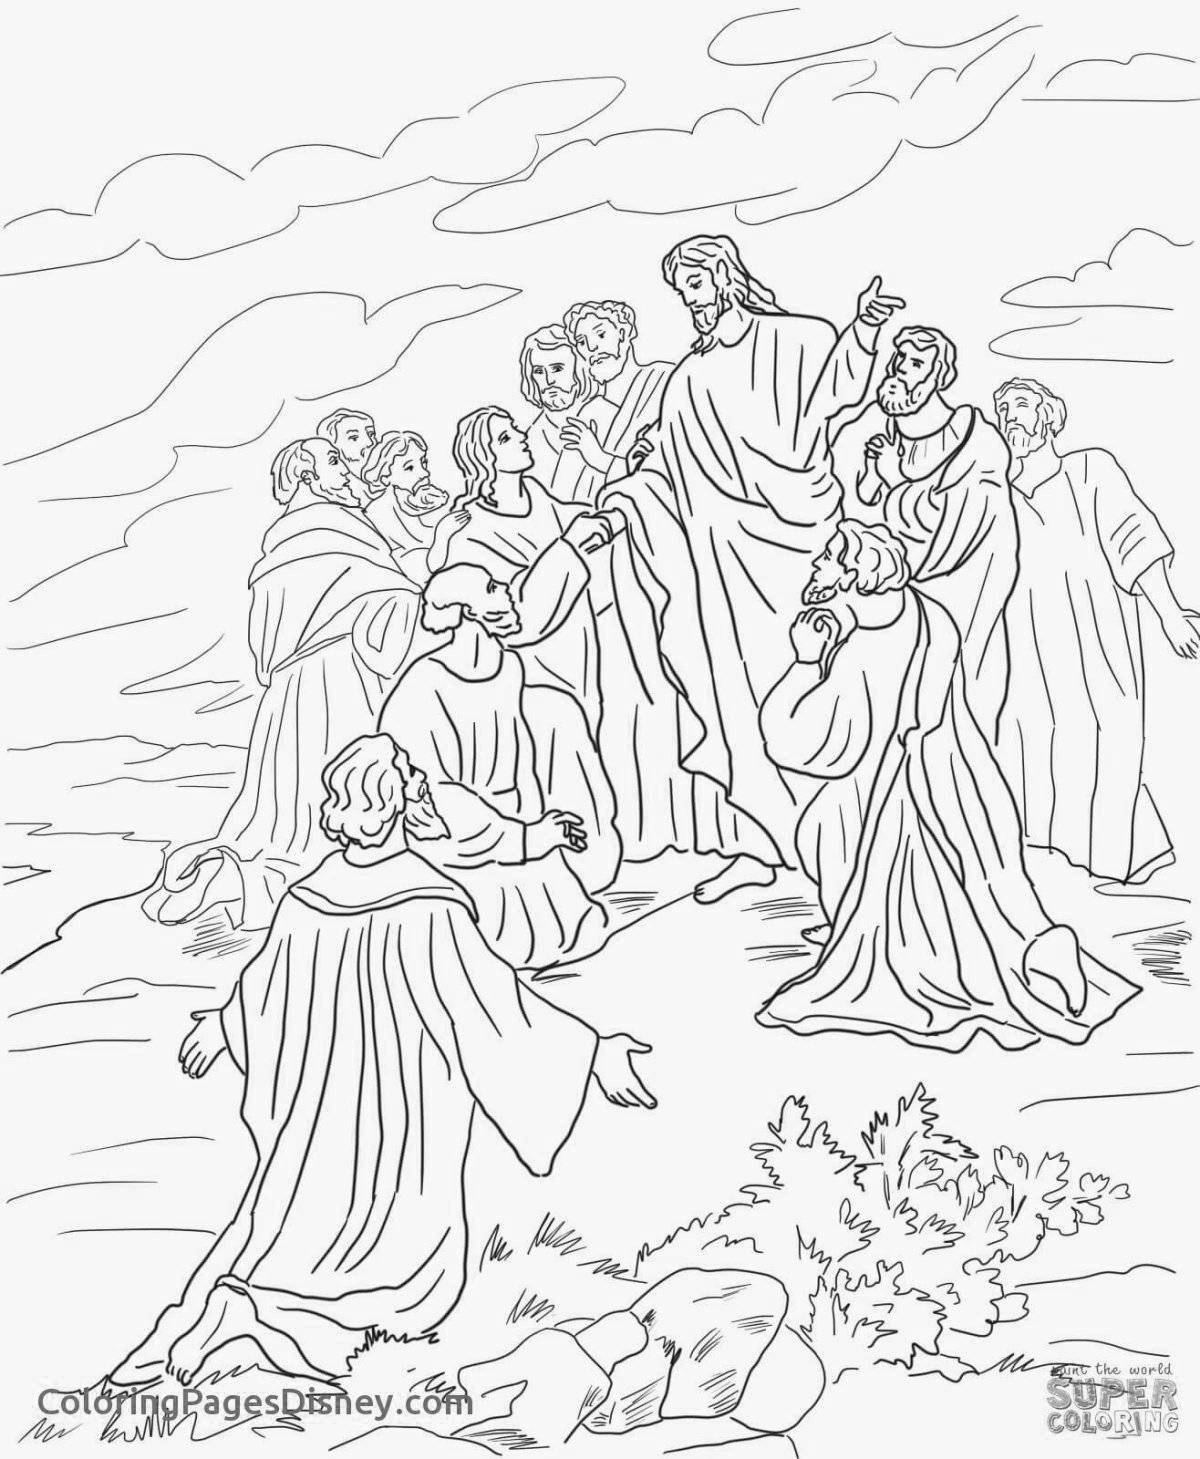 Coloring page splendid meeting of the Lord